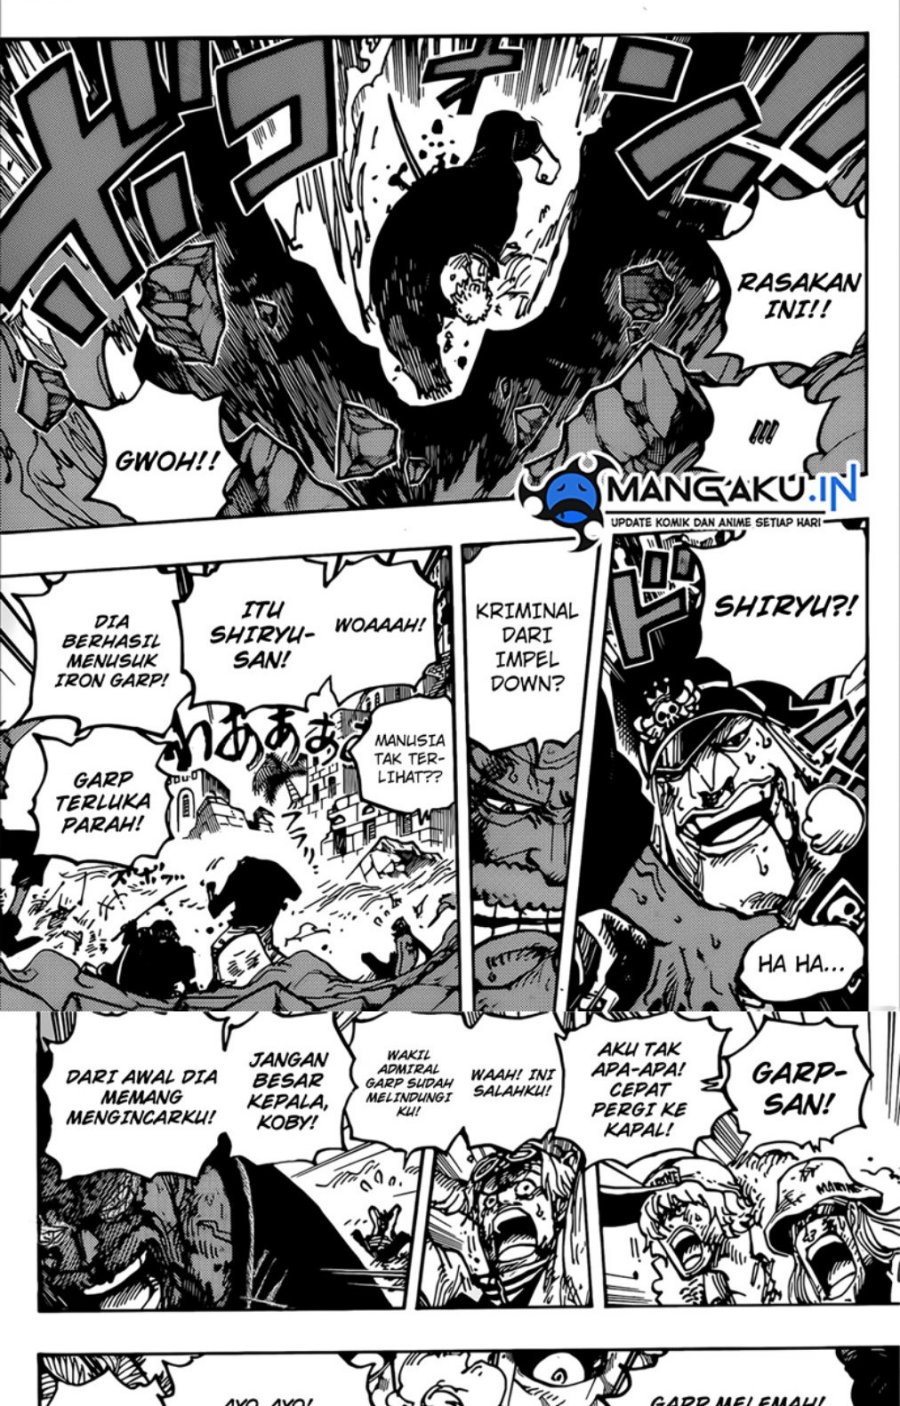 One Piece Chapter 1087